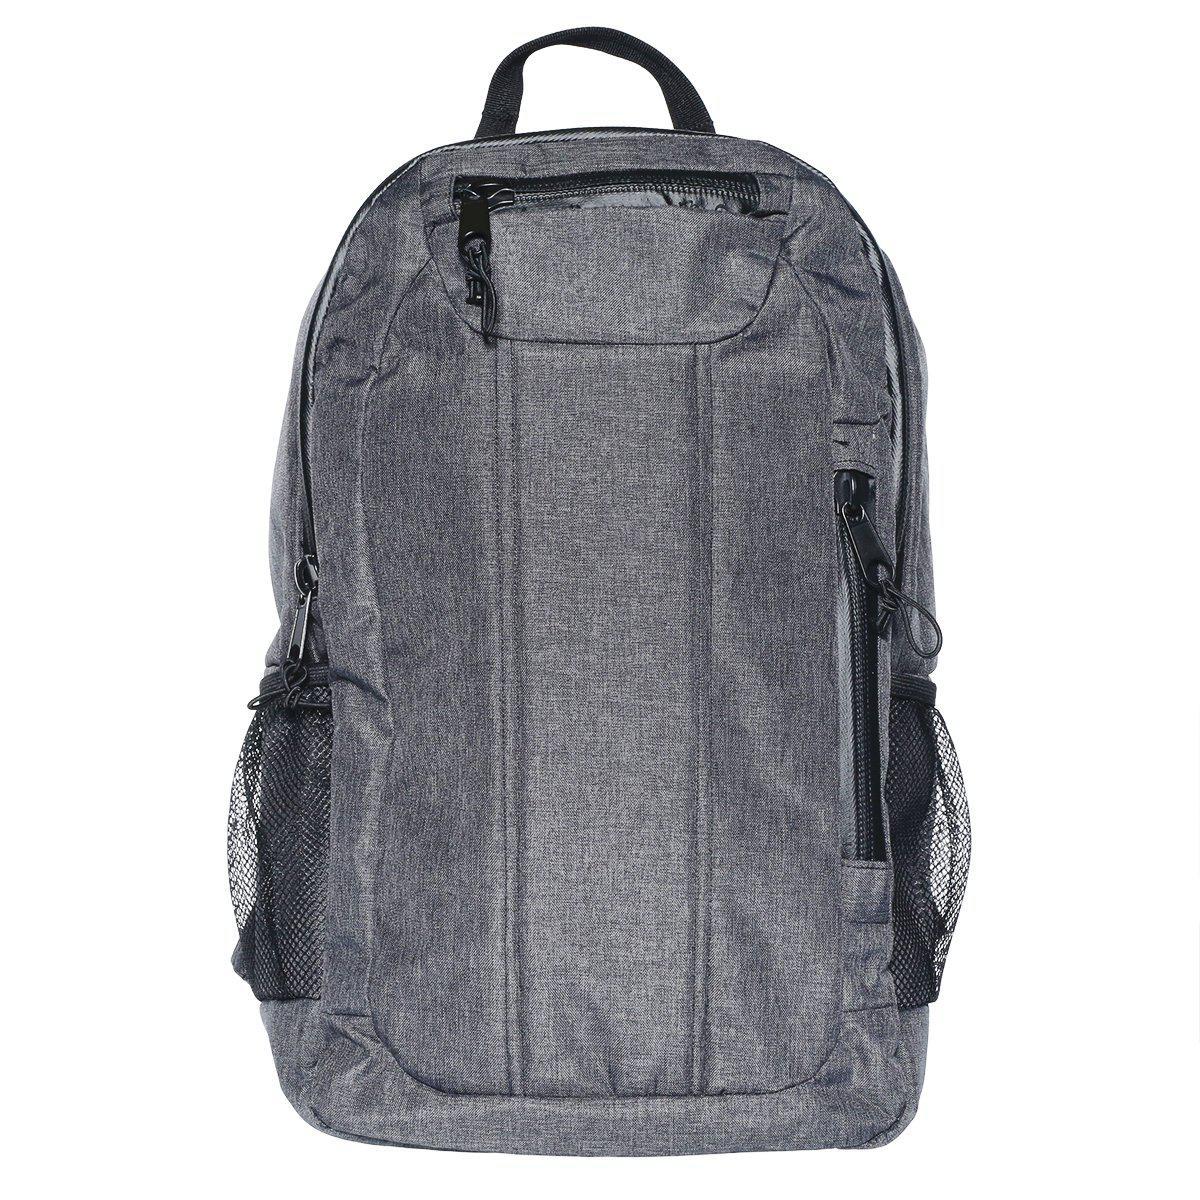 Carbon Lined Backpack